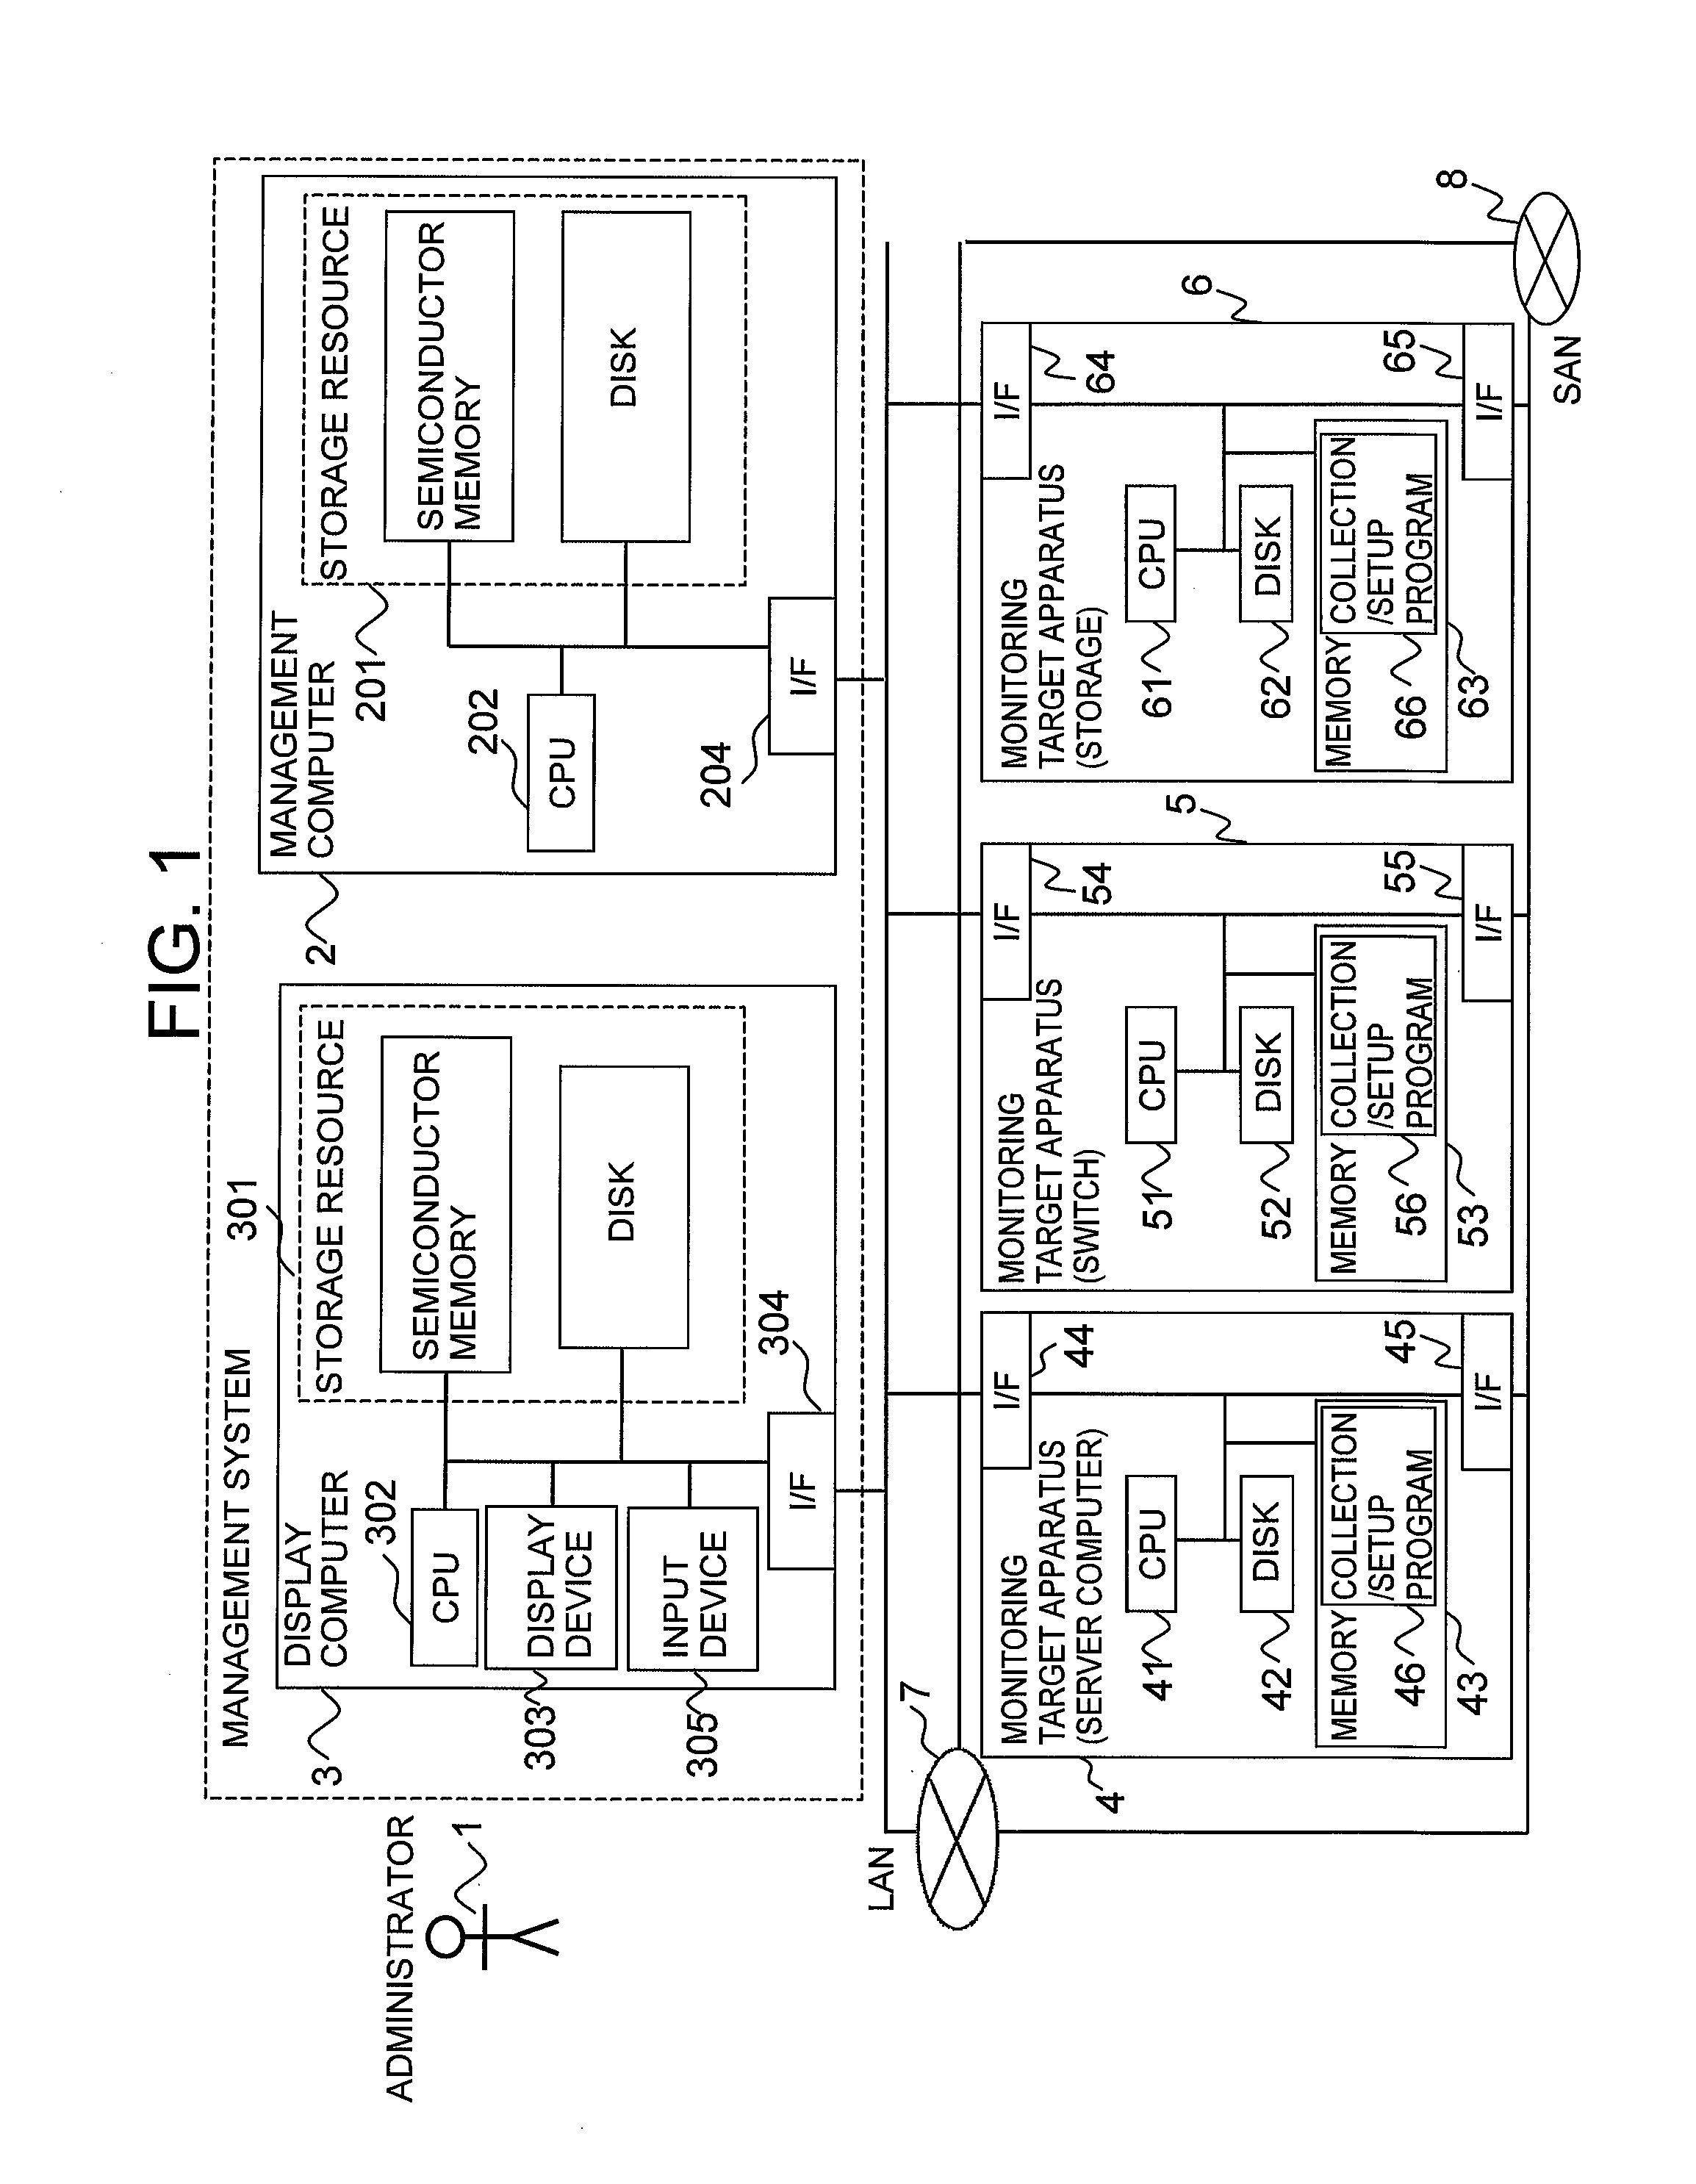 Method for inferring extent of impact of configuration change event on system failure